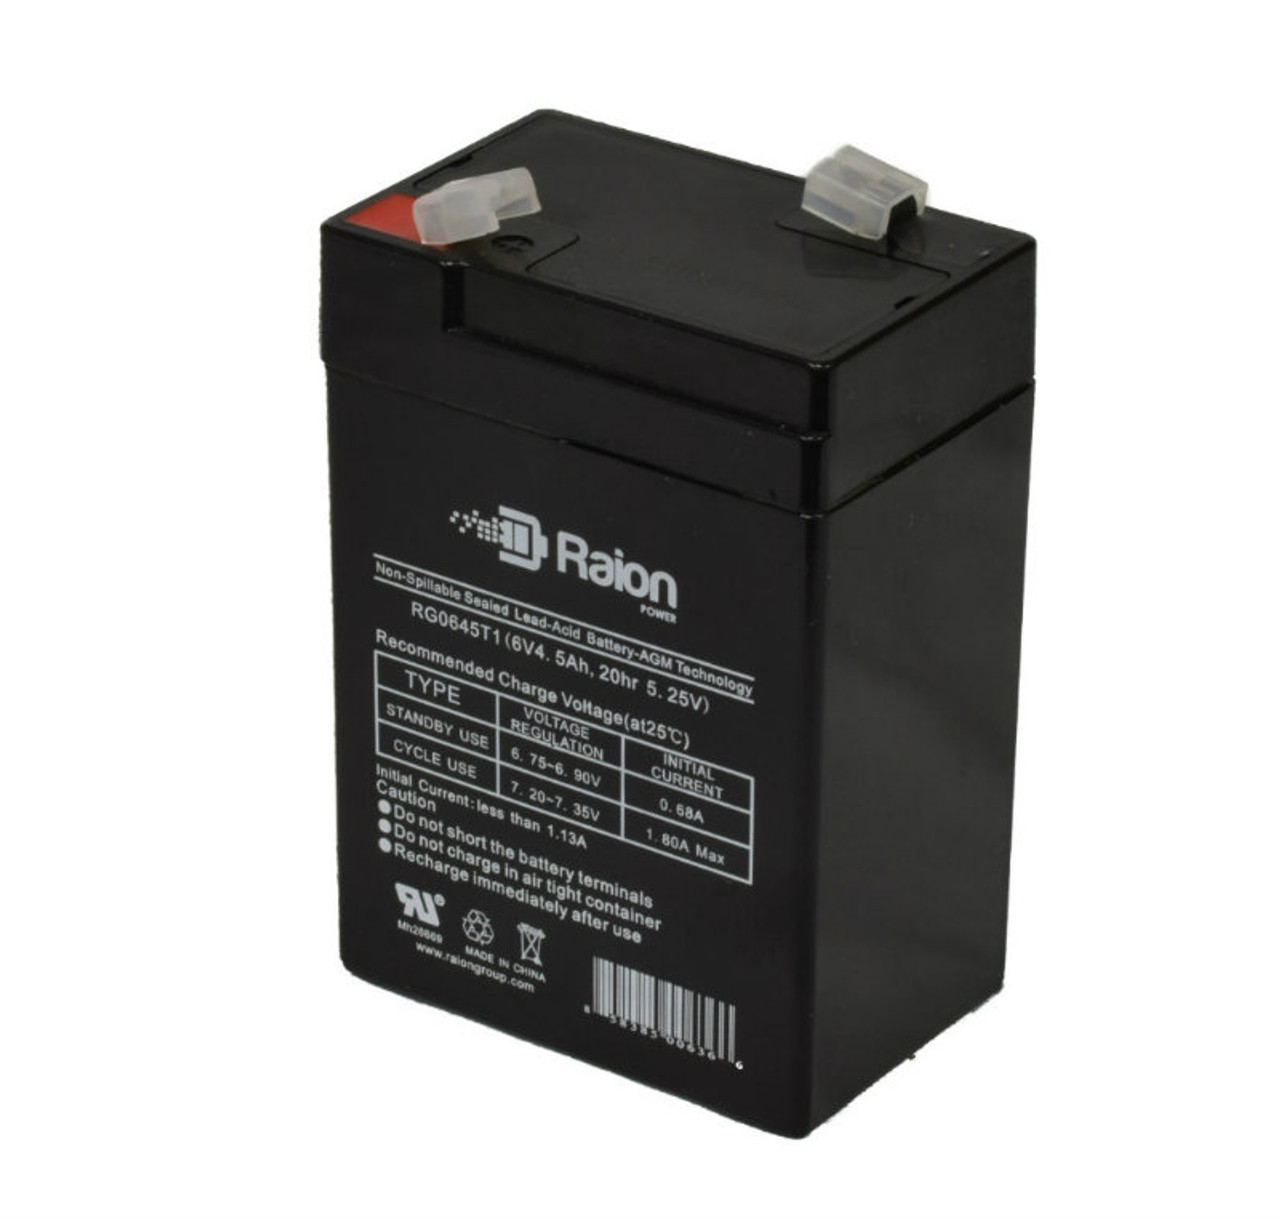 Raion Power RG0645T1 6V 4.5Ah Replacement Battery Cartridge for Peg Perego ED018 6V Cyclone